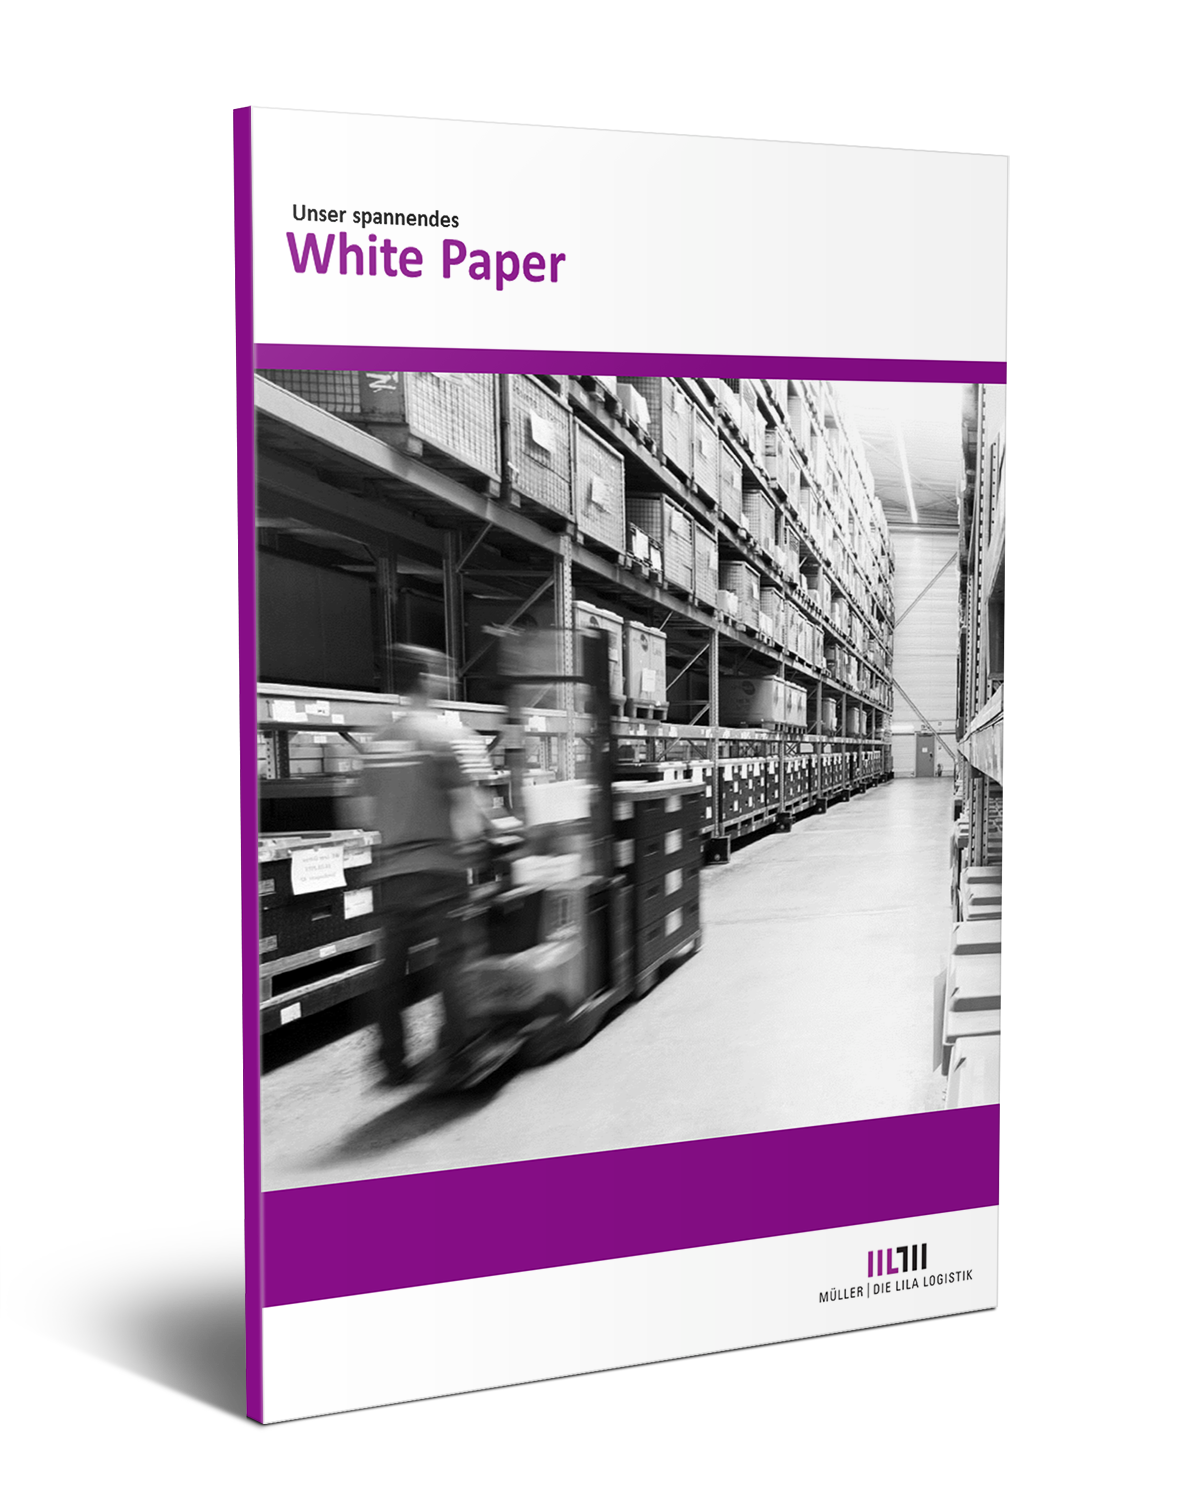 Supply Chain Consulting - White Paper